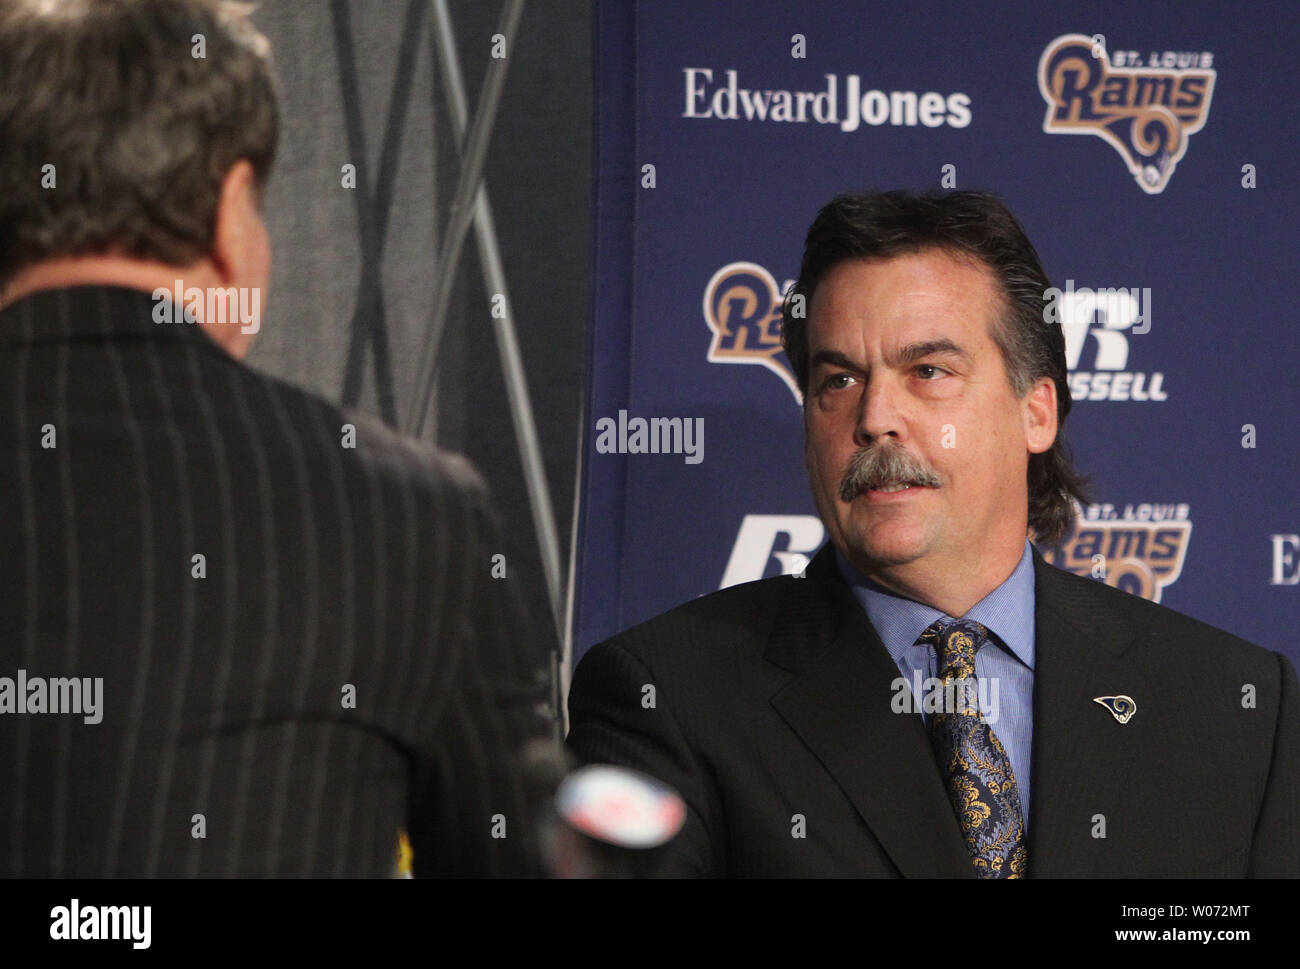 St. Louis Rams new head coach Jeff Fisher (R) is welcomed by team owner Stan Kronke as he is introduced at the team's practice facility in Earth City, Missouri on January 17, 2012. UPI/Bill Greenblatt Stock Photo